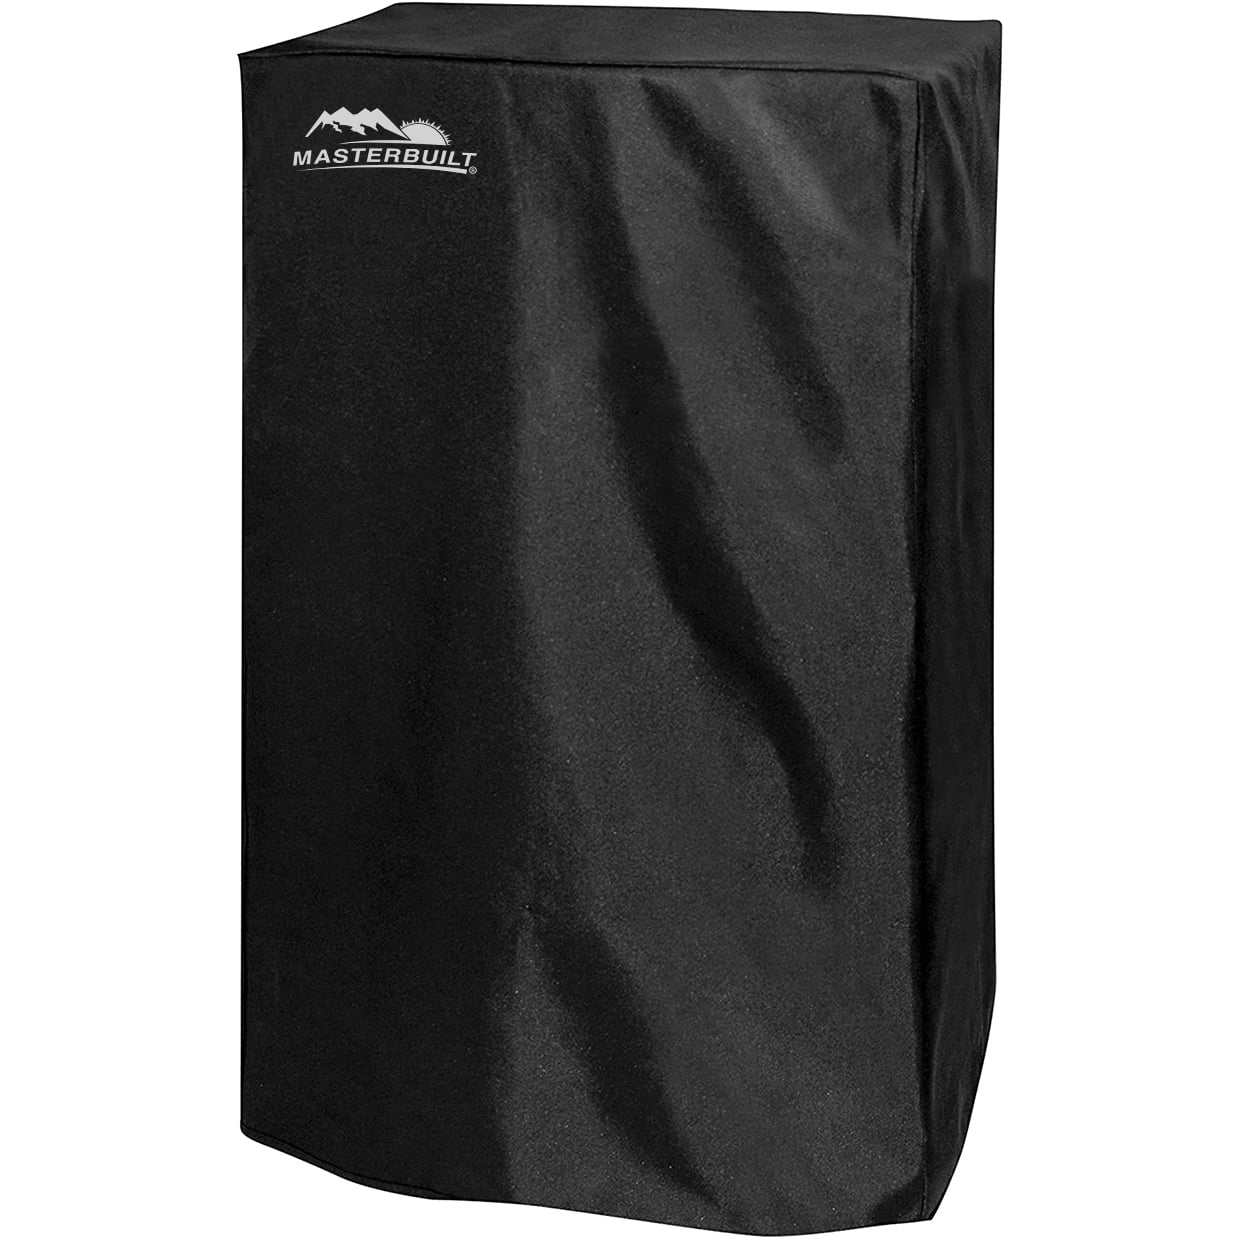 Black 40" Electric Smoker Cover UV Protected Waterproof Includes Storage Bag 